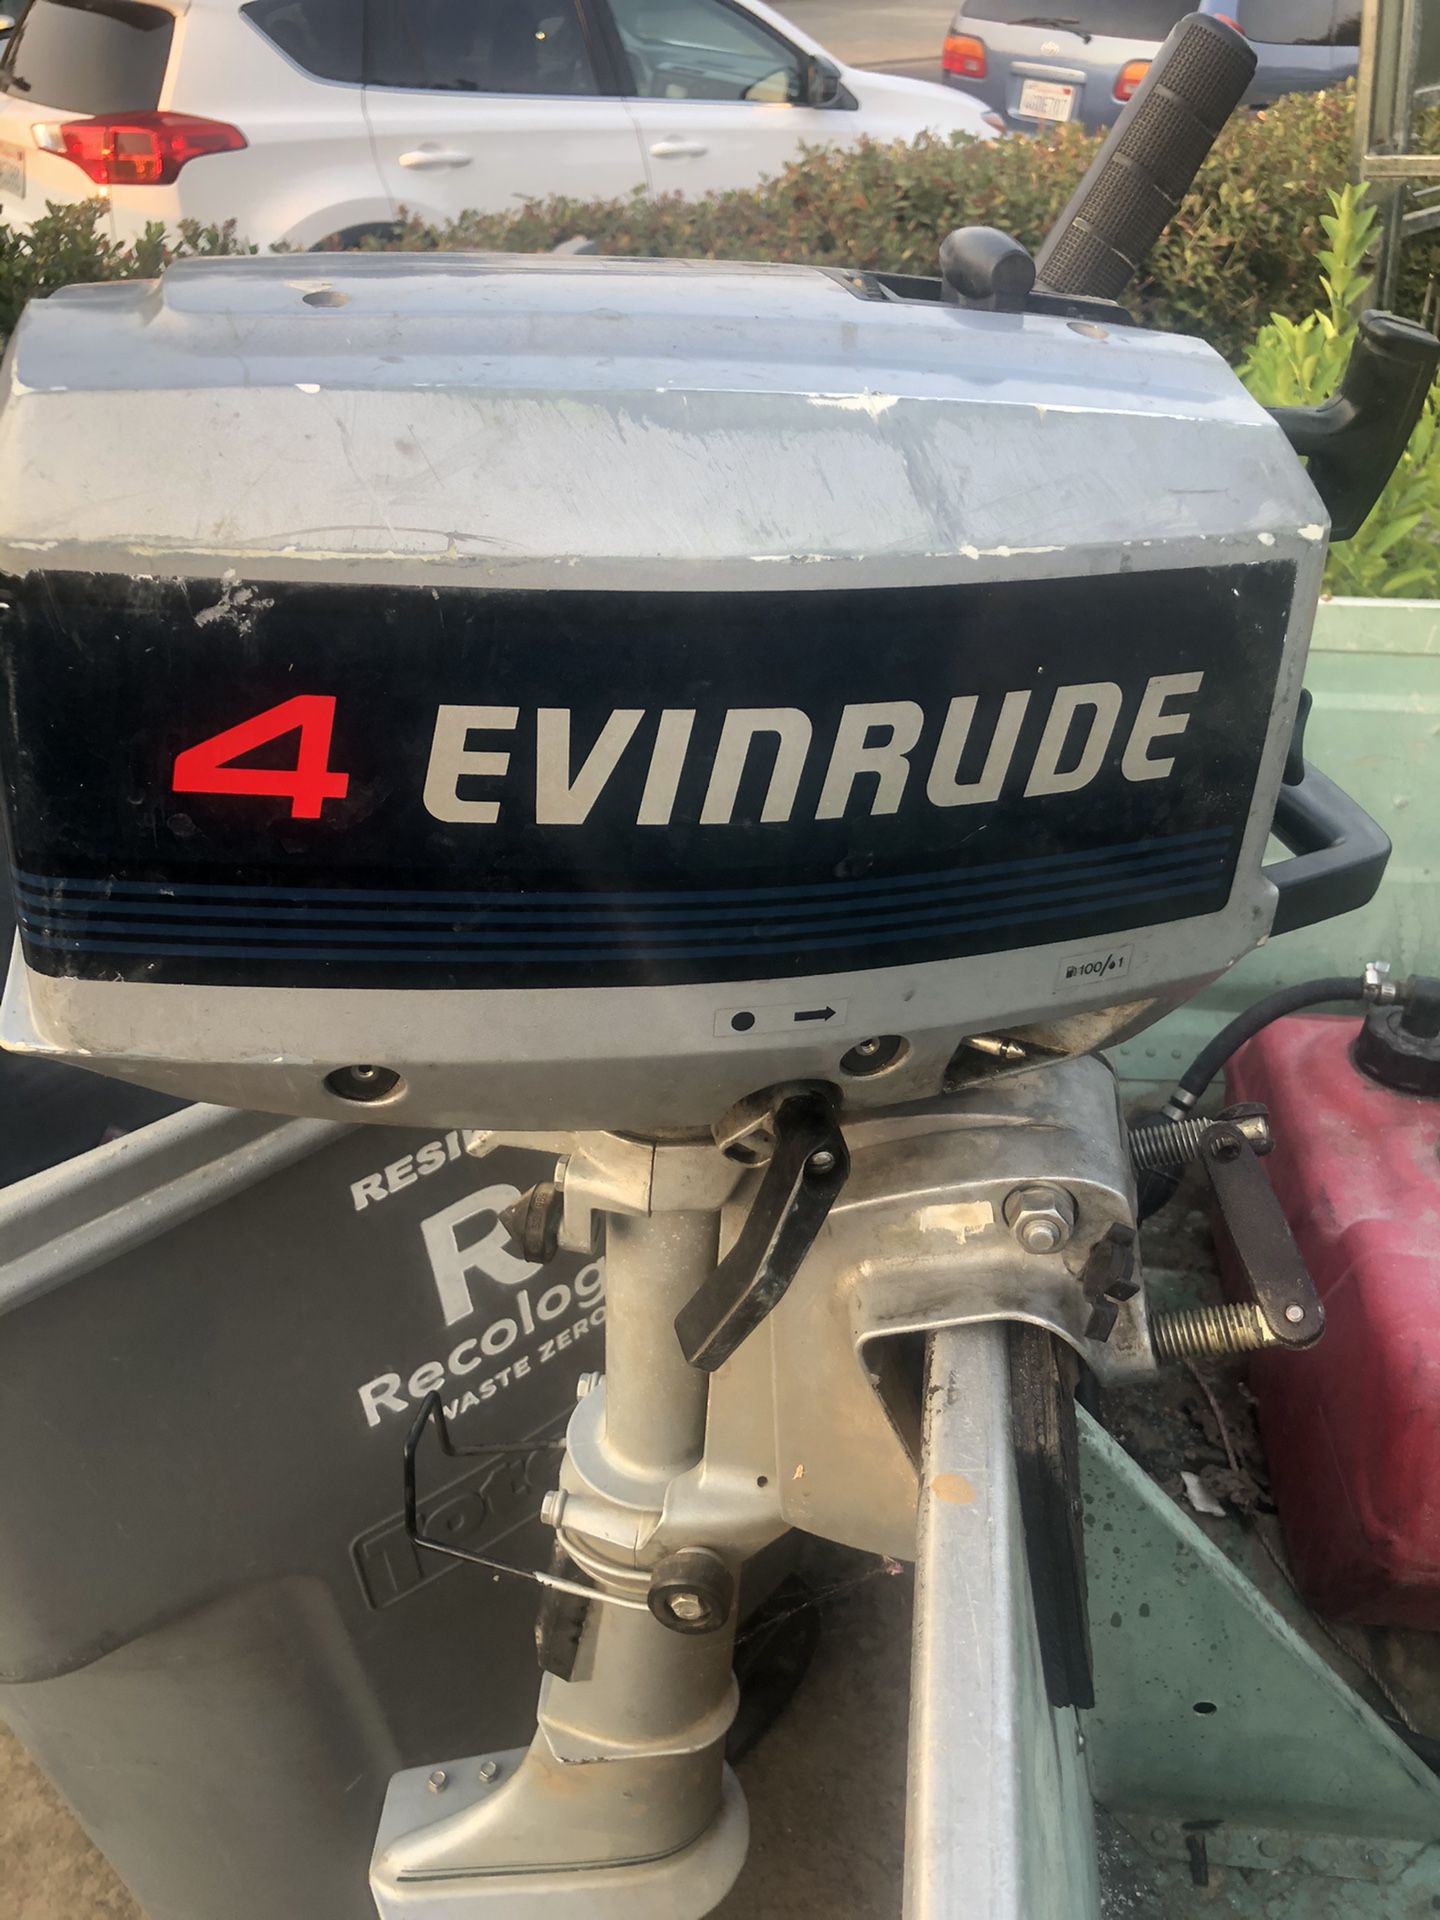 4HP Evinrude Outboard motor and 12 Ft Aluminum Boat with trailer.